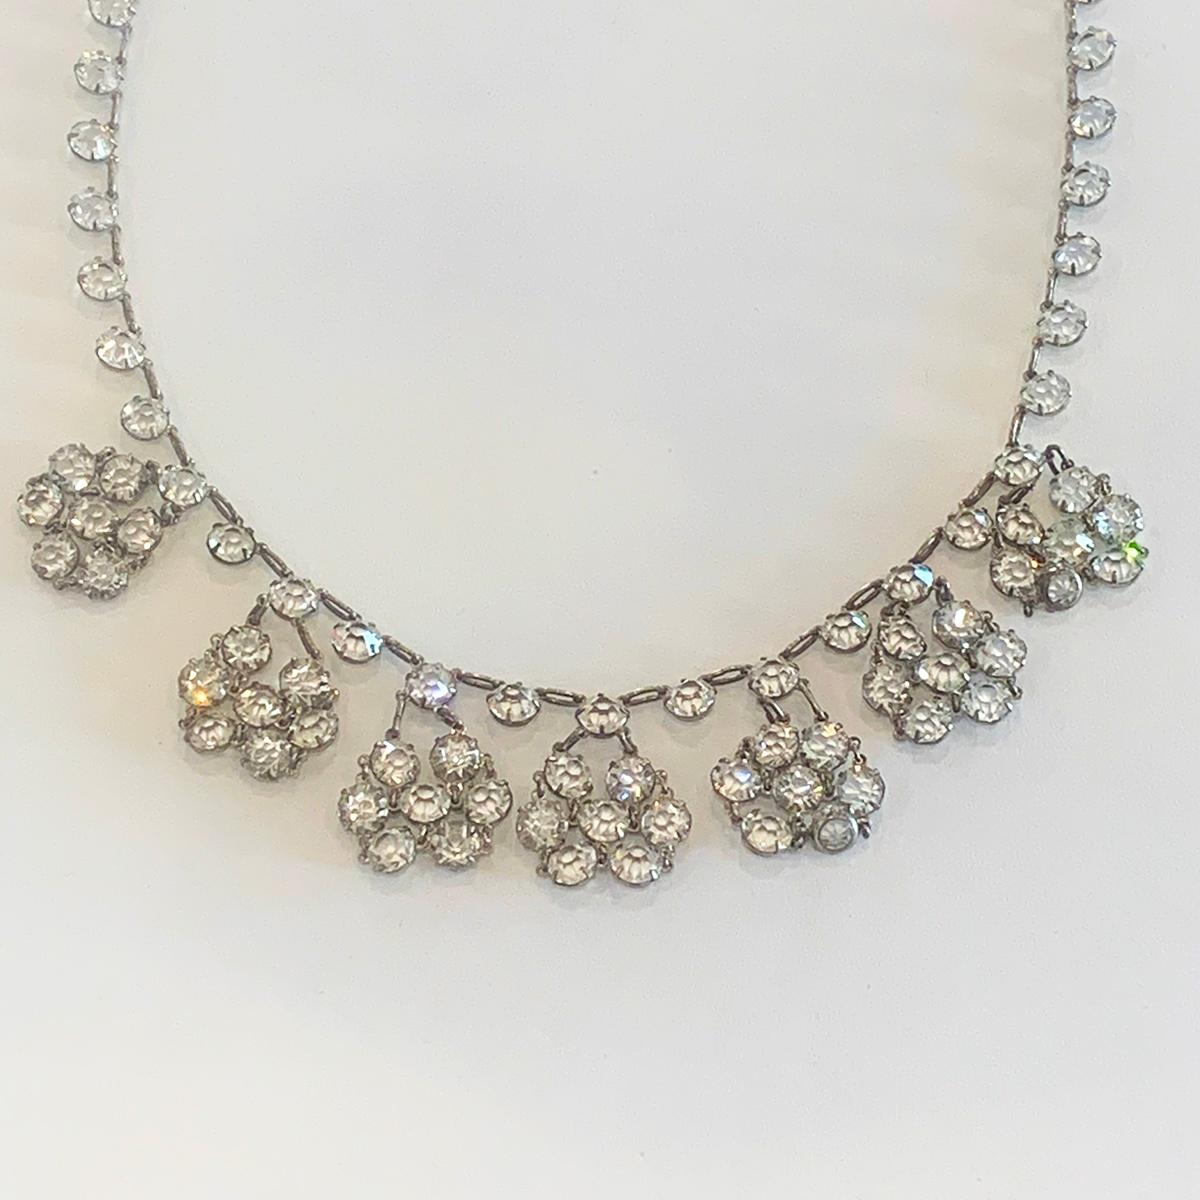 Stunning Art Deco Necklace in Sterling Silver with ring mounted finely facetted mine crystal that sparkles with movement. Totally perfect with no damage, no losses. Original ring clasp Hallmarked “STERLING”, indicating U.S.A. Silver manufacture.